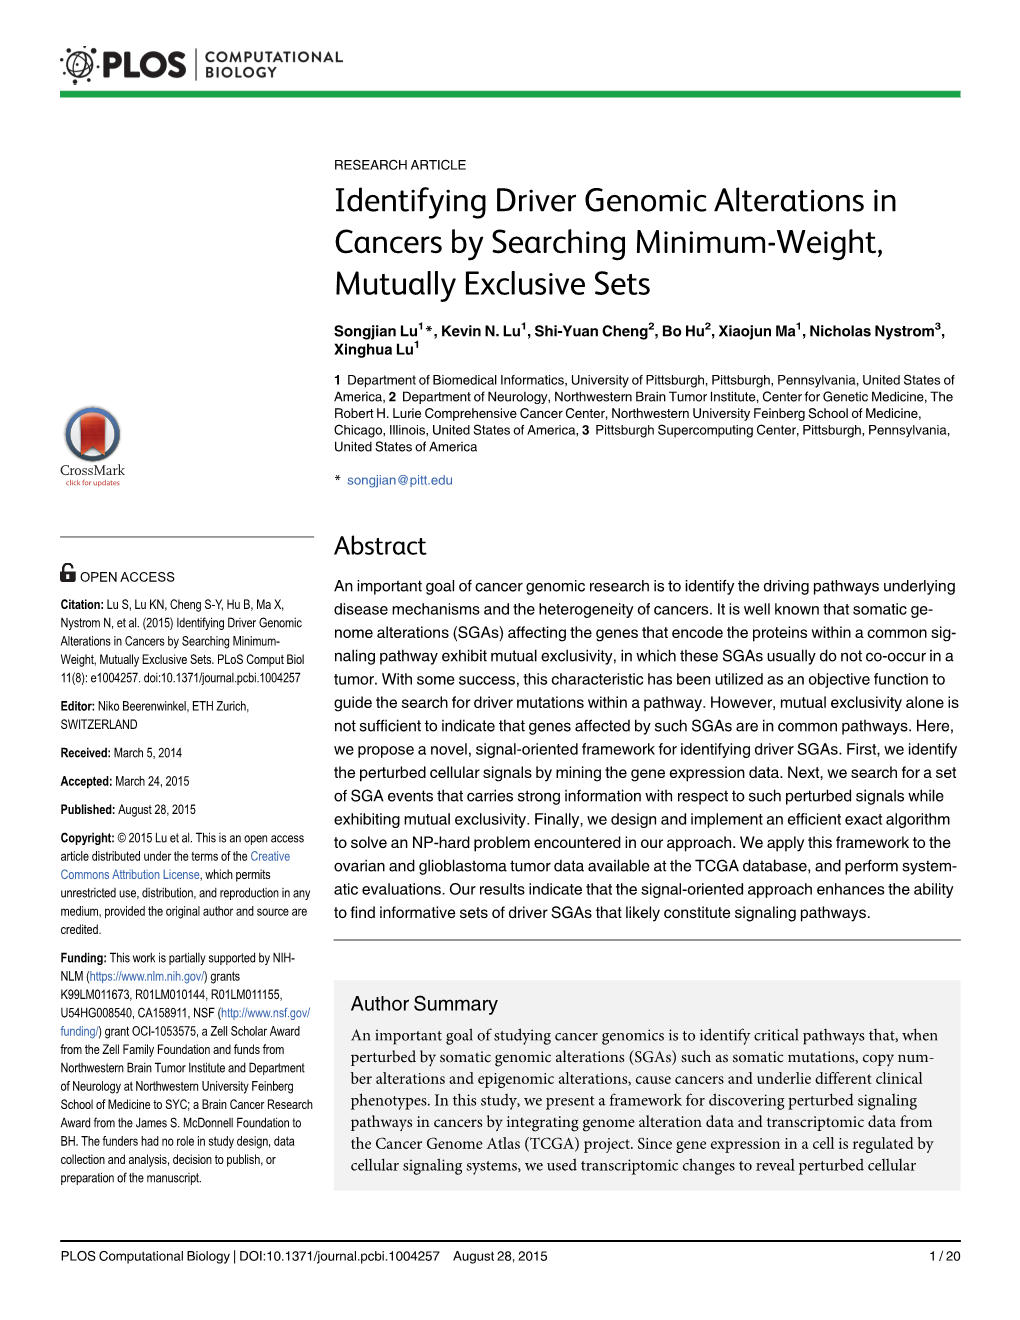 Identifying Driver Genomic Alterations in Cancers by Searching Minimum-Weight, Mutually Exclusive Sets